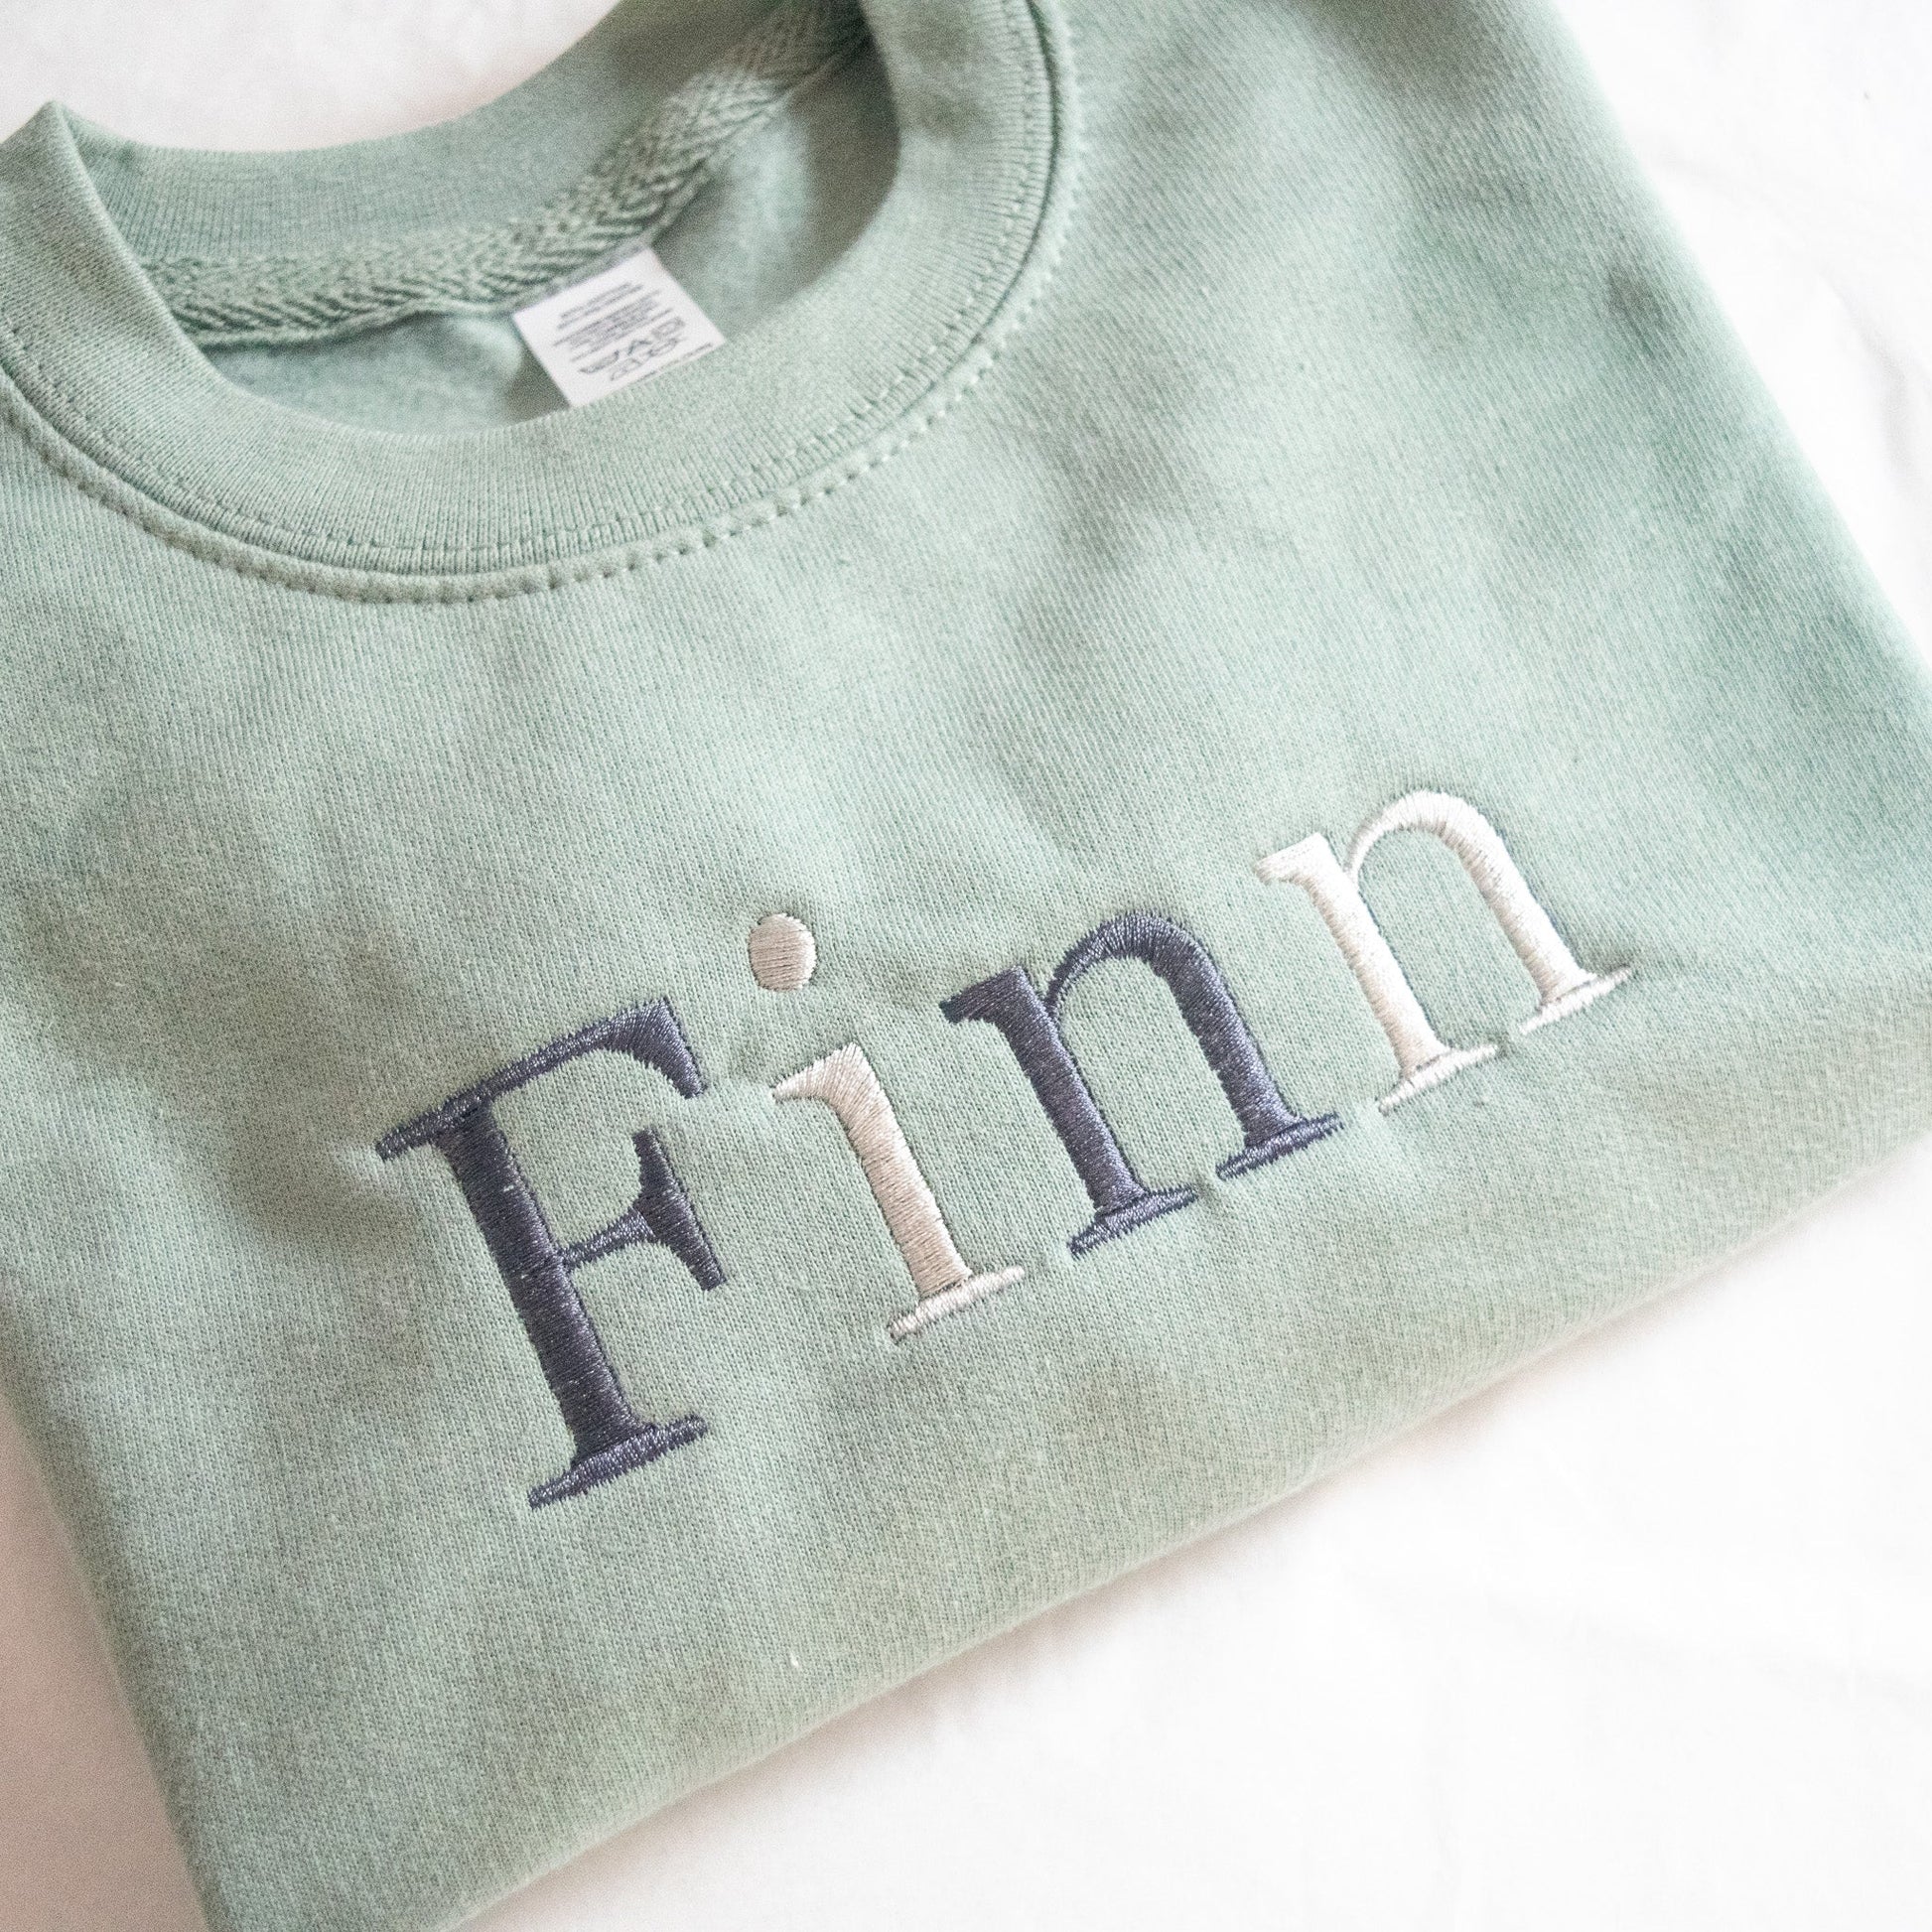 childrens jumper embroidered with any name or slogan with monochrome thread colours oversized and comfy